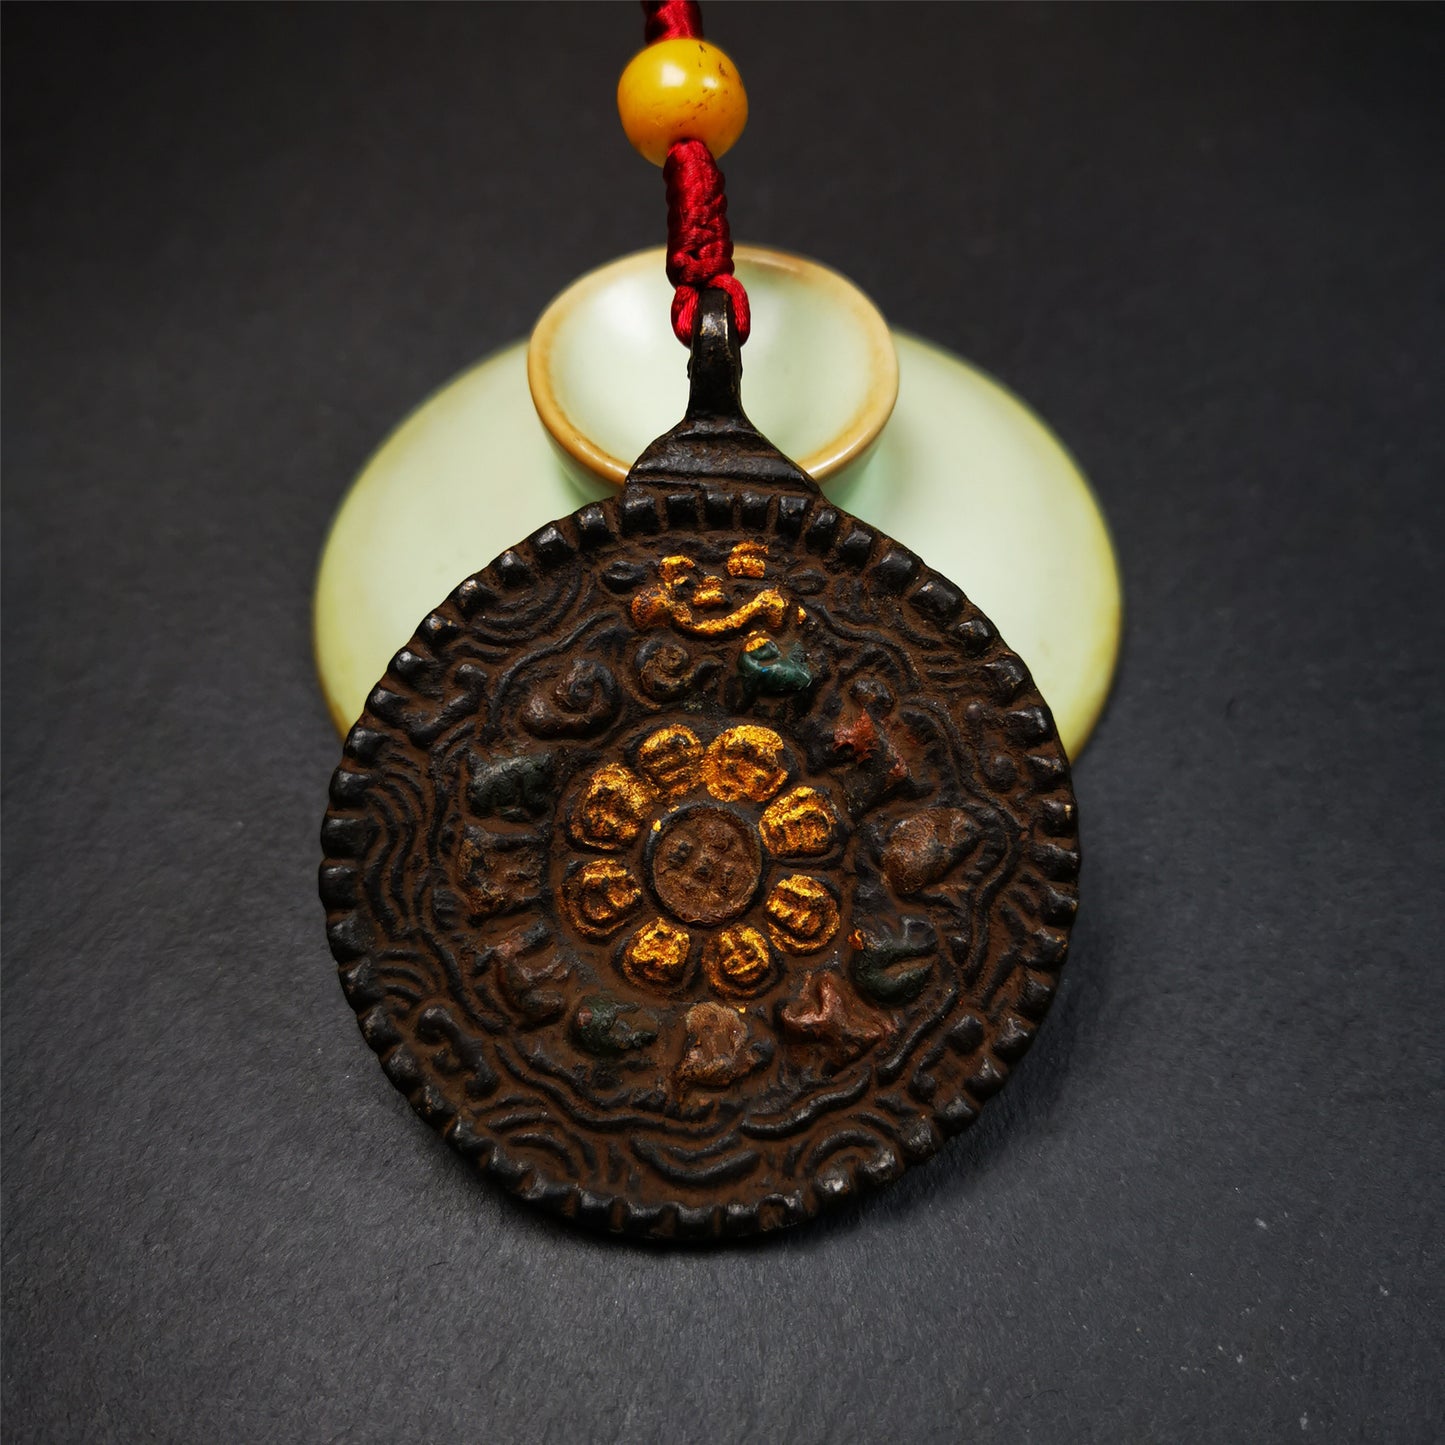 This unique Troma Nagmo Melong Amulet was collected from Goinqên Monastery,about 40 years old,consecrated and blessed by lama. It is round shape,made of thokcha,2.2 inch diameter,the front pattern is Tibetan Budhist calendar symbol - SIPAHO(srid pa ho),and the back is Troma Nagmo. You can make it into pendant or keychain, or just put it on your desk,as an ornament.